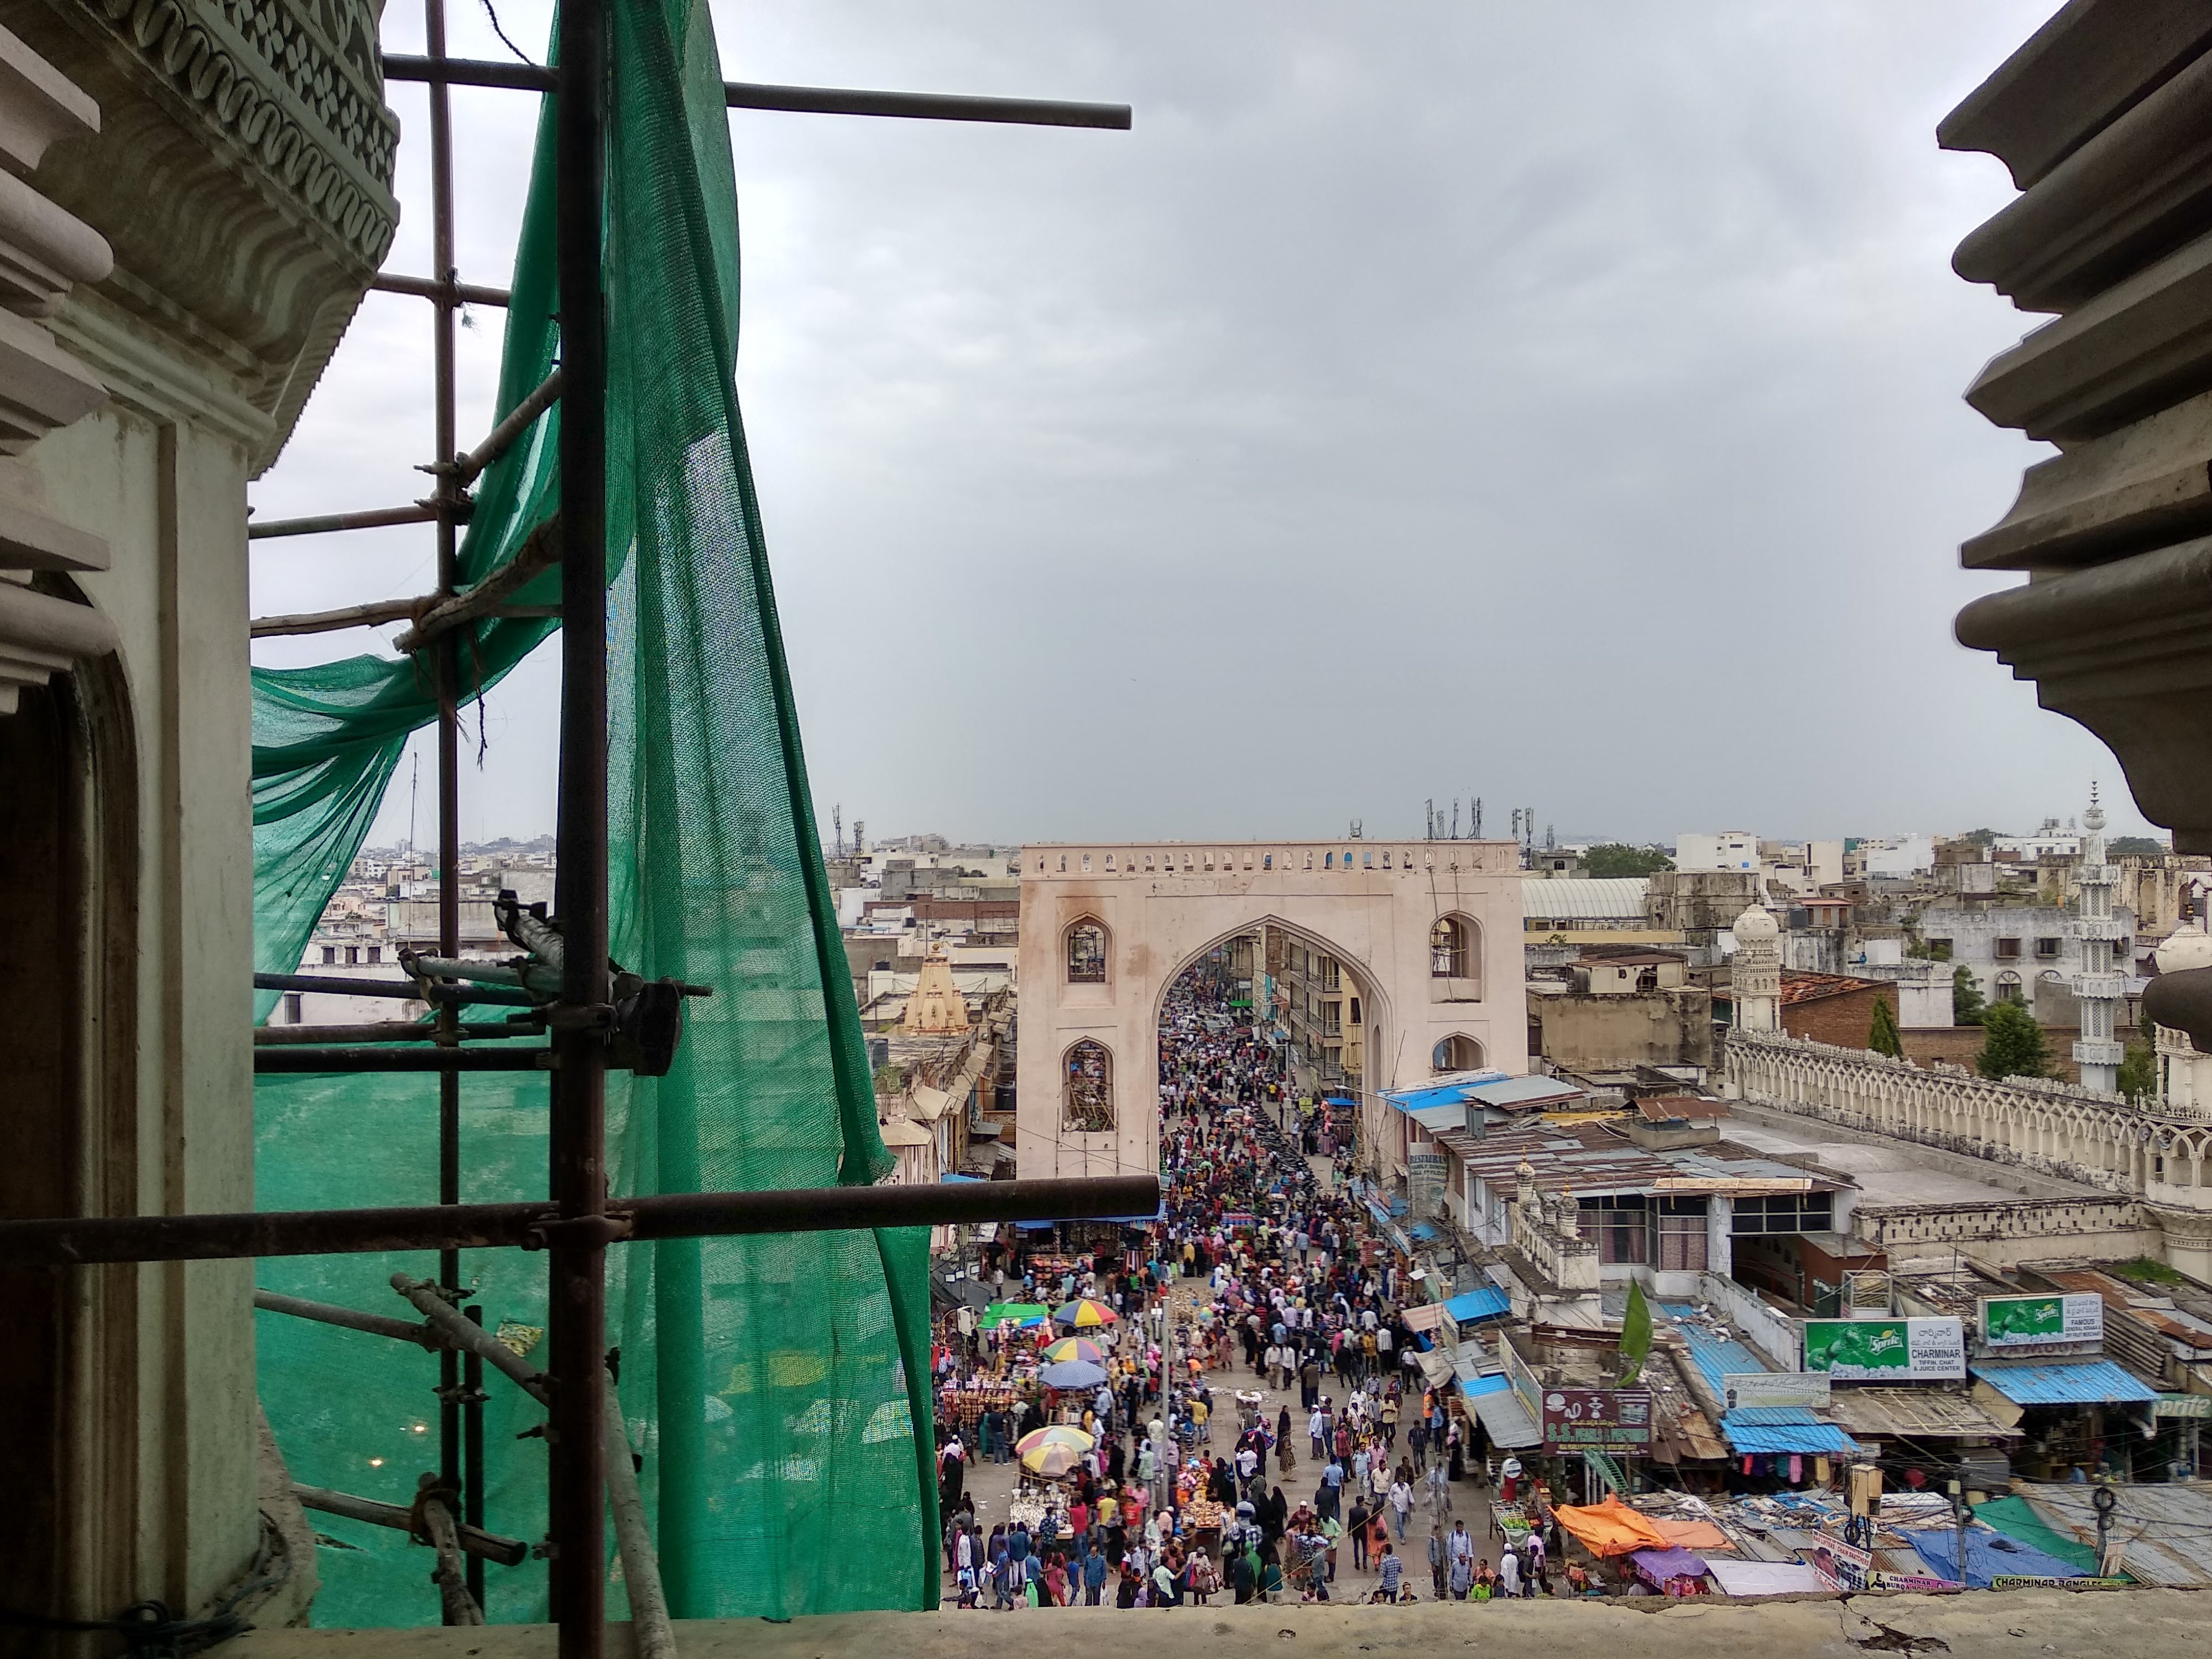 View of Charminar Kaman from atop the Charminar